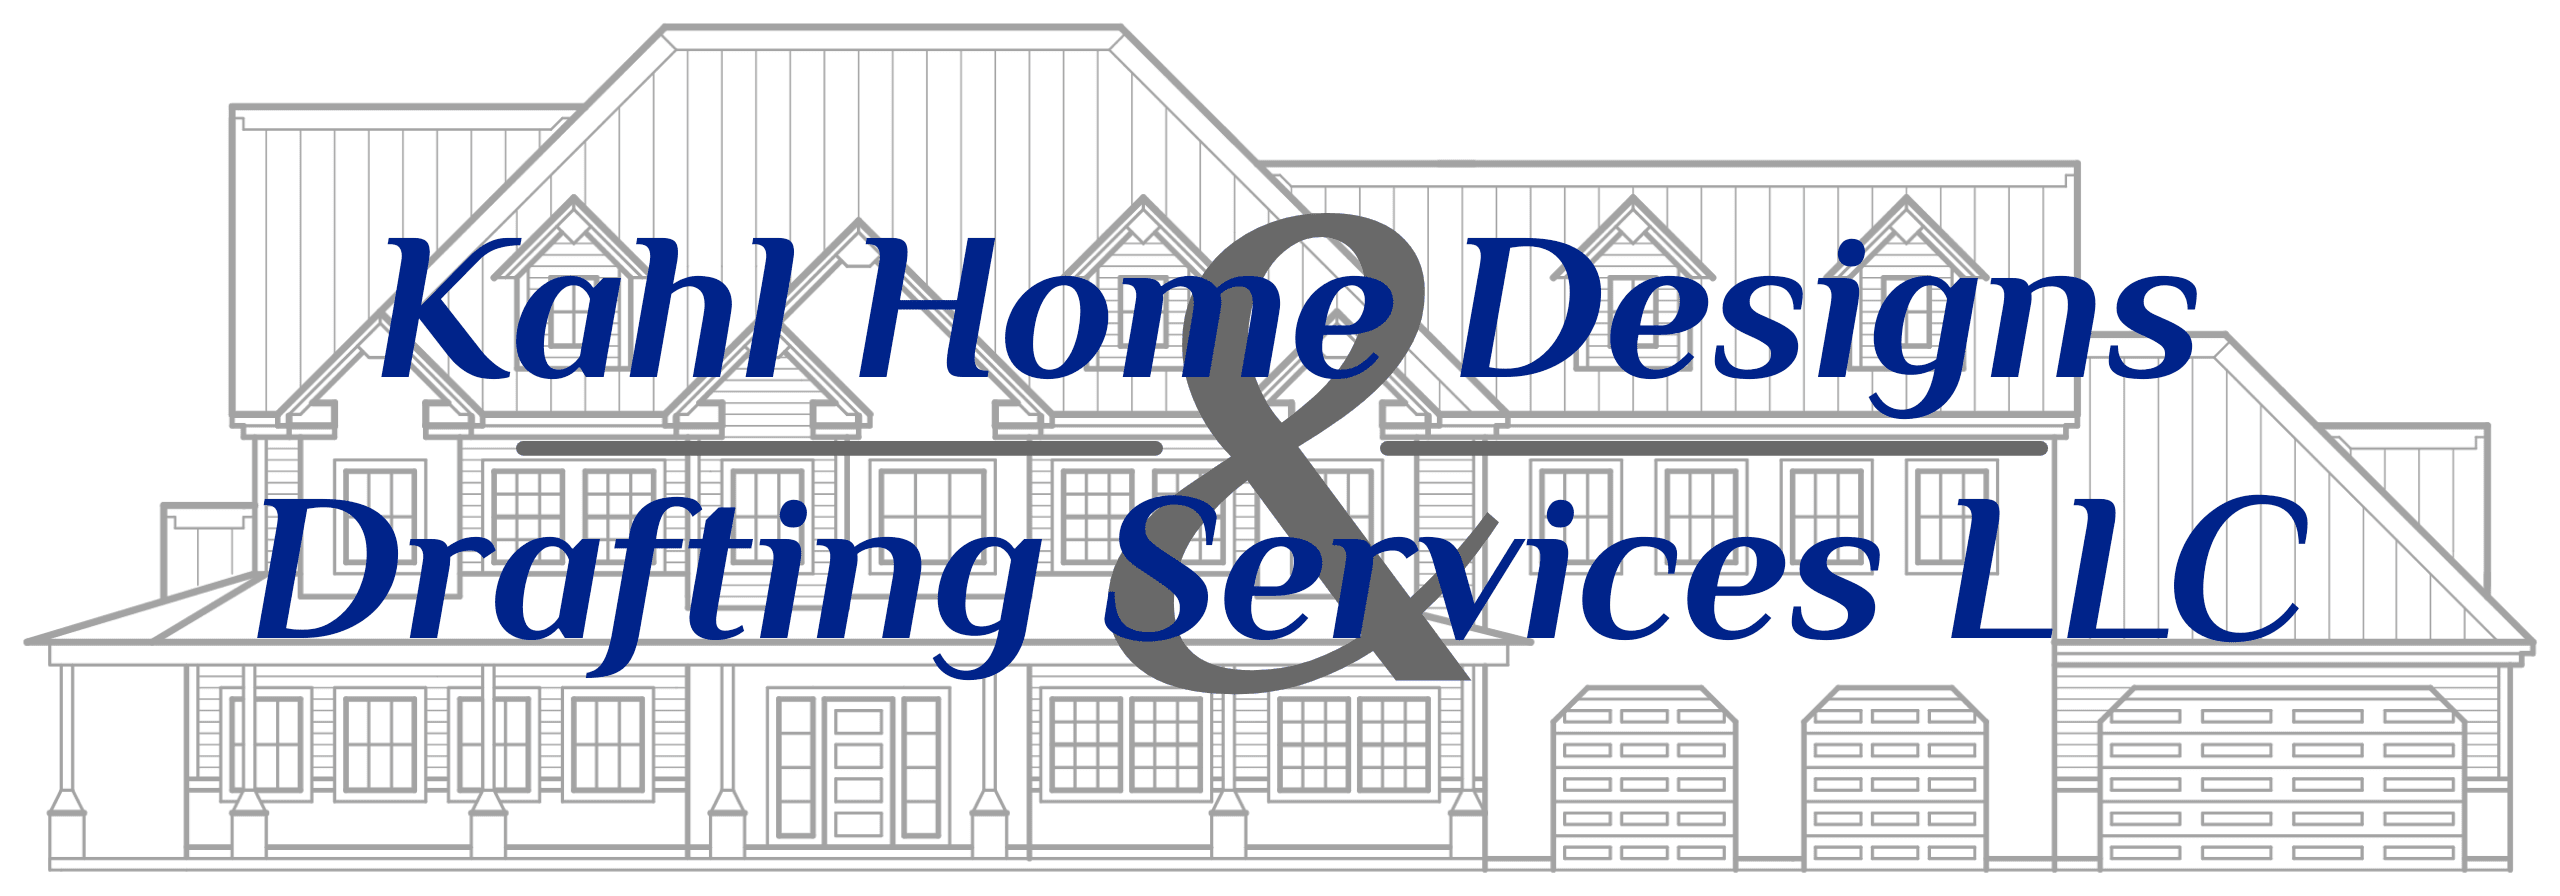 Kahl Home Designs And Drafting Services LLC